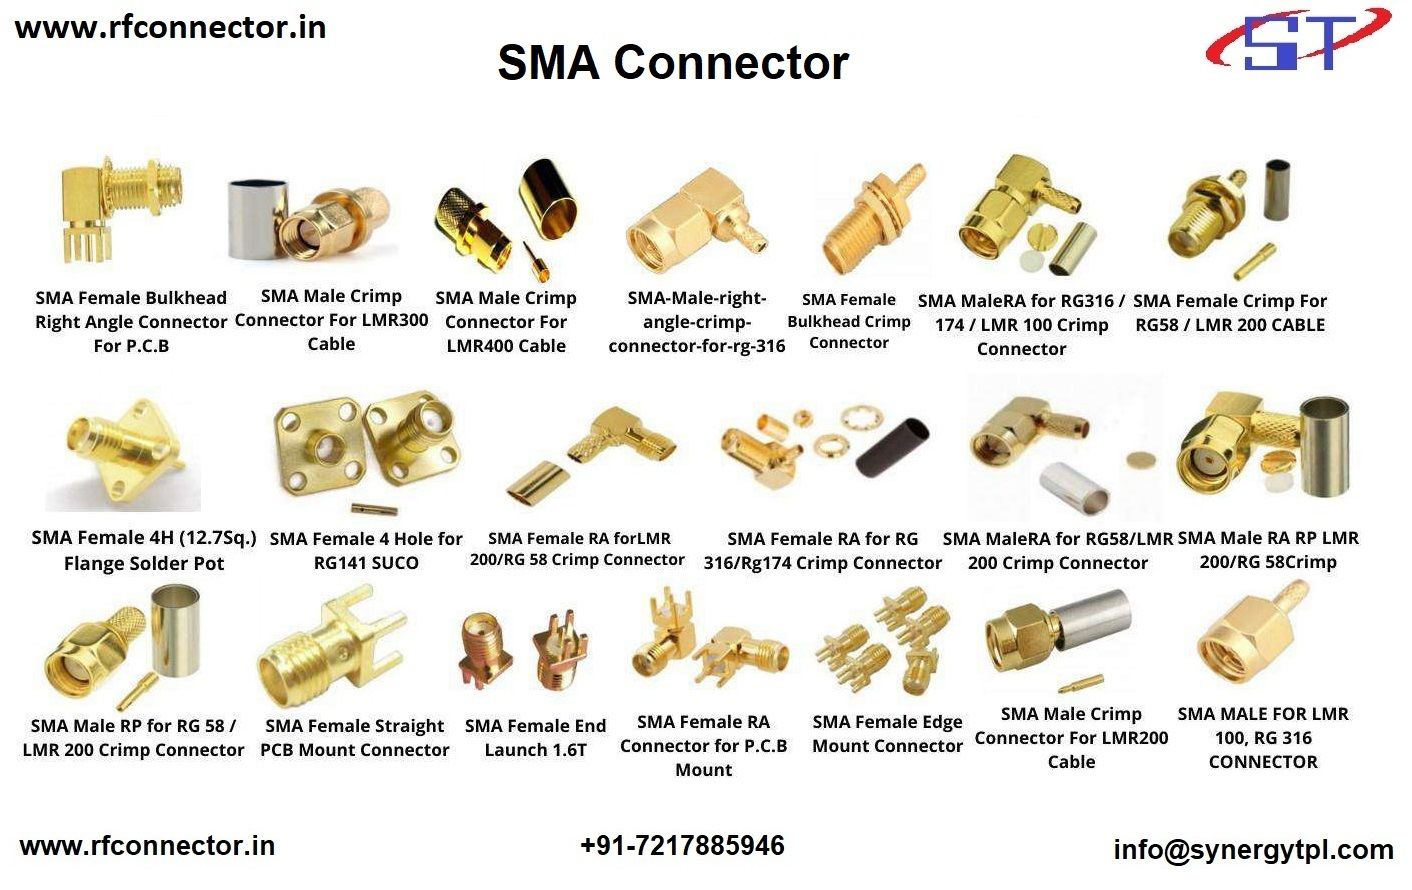 SMA male crimp connector for MLR 400 cable